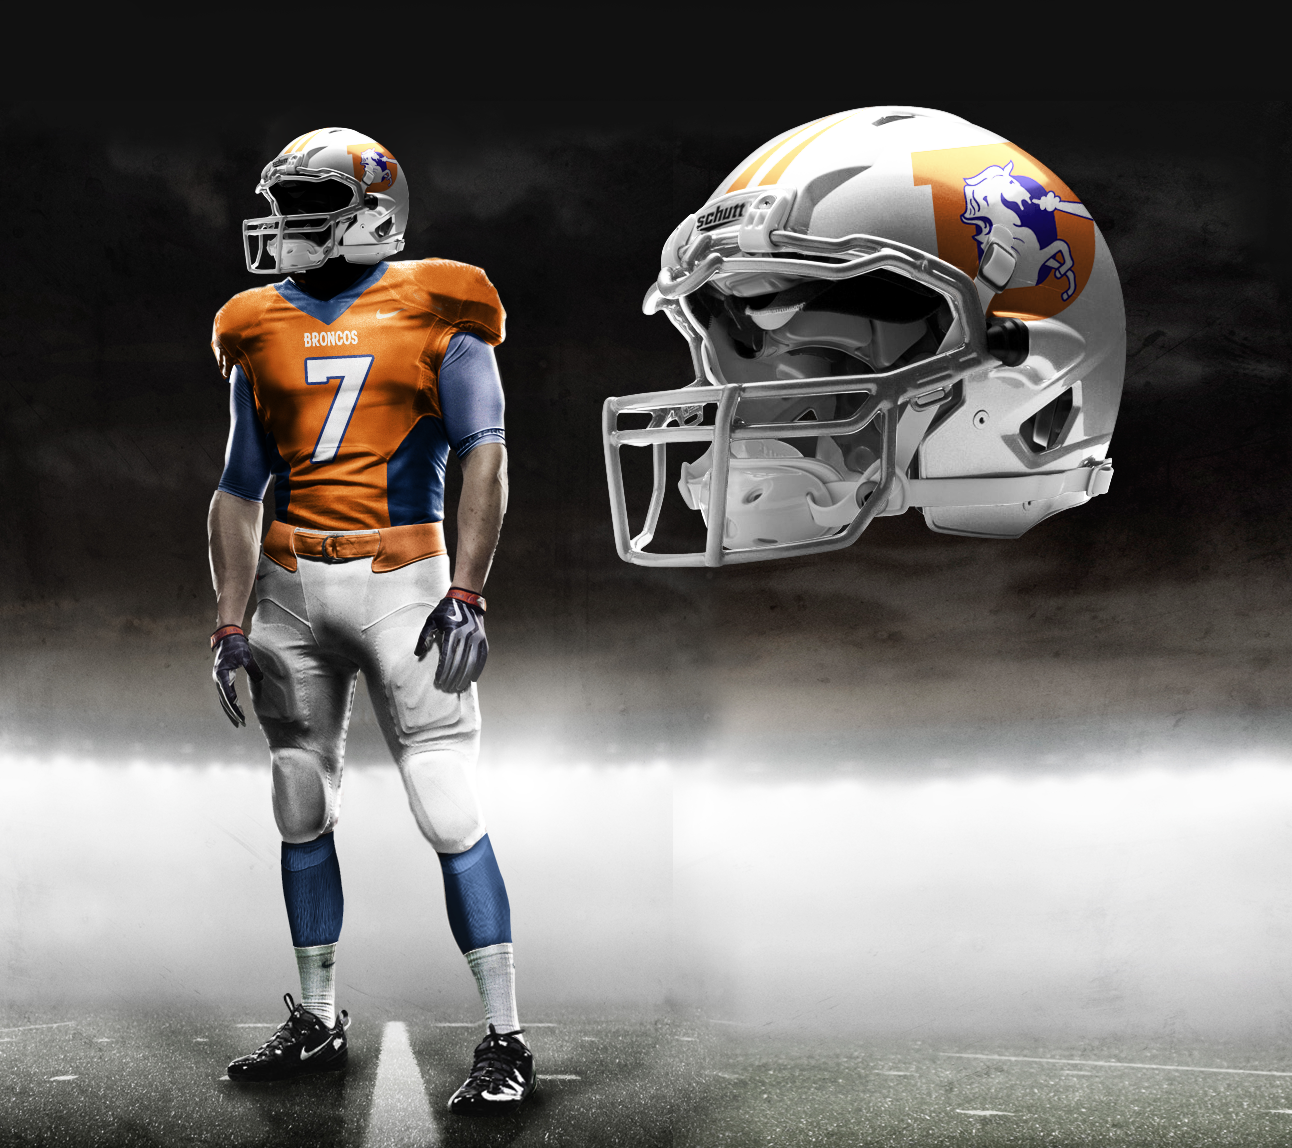 New NFL Nike Uniforms (with pictures of all teams) Mackin's Blog